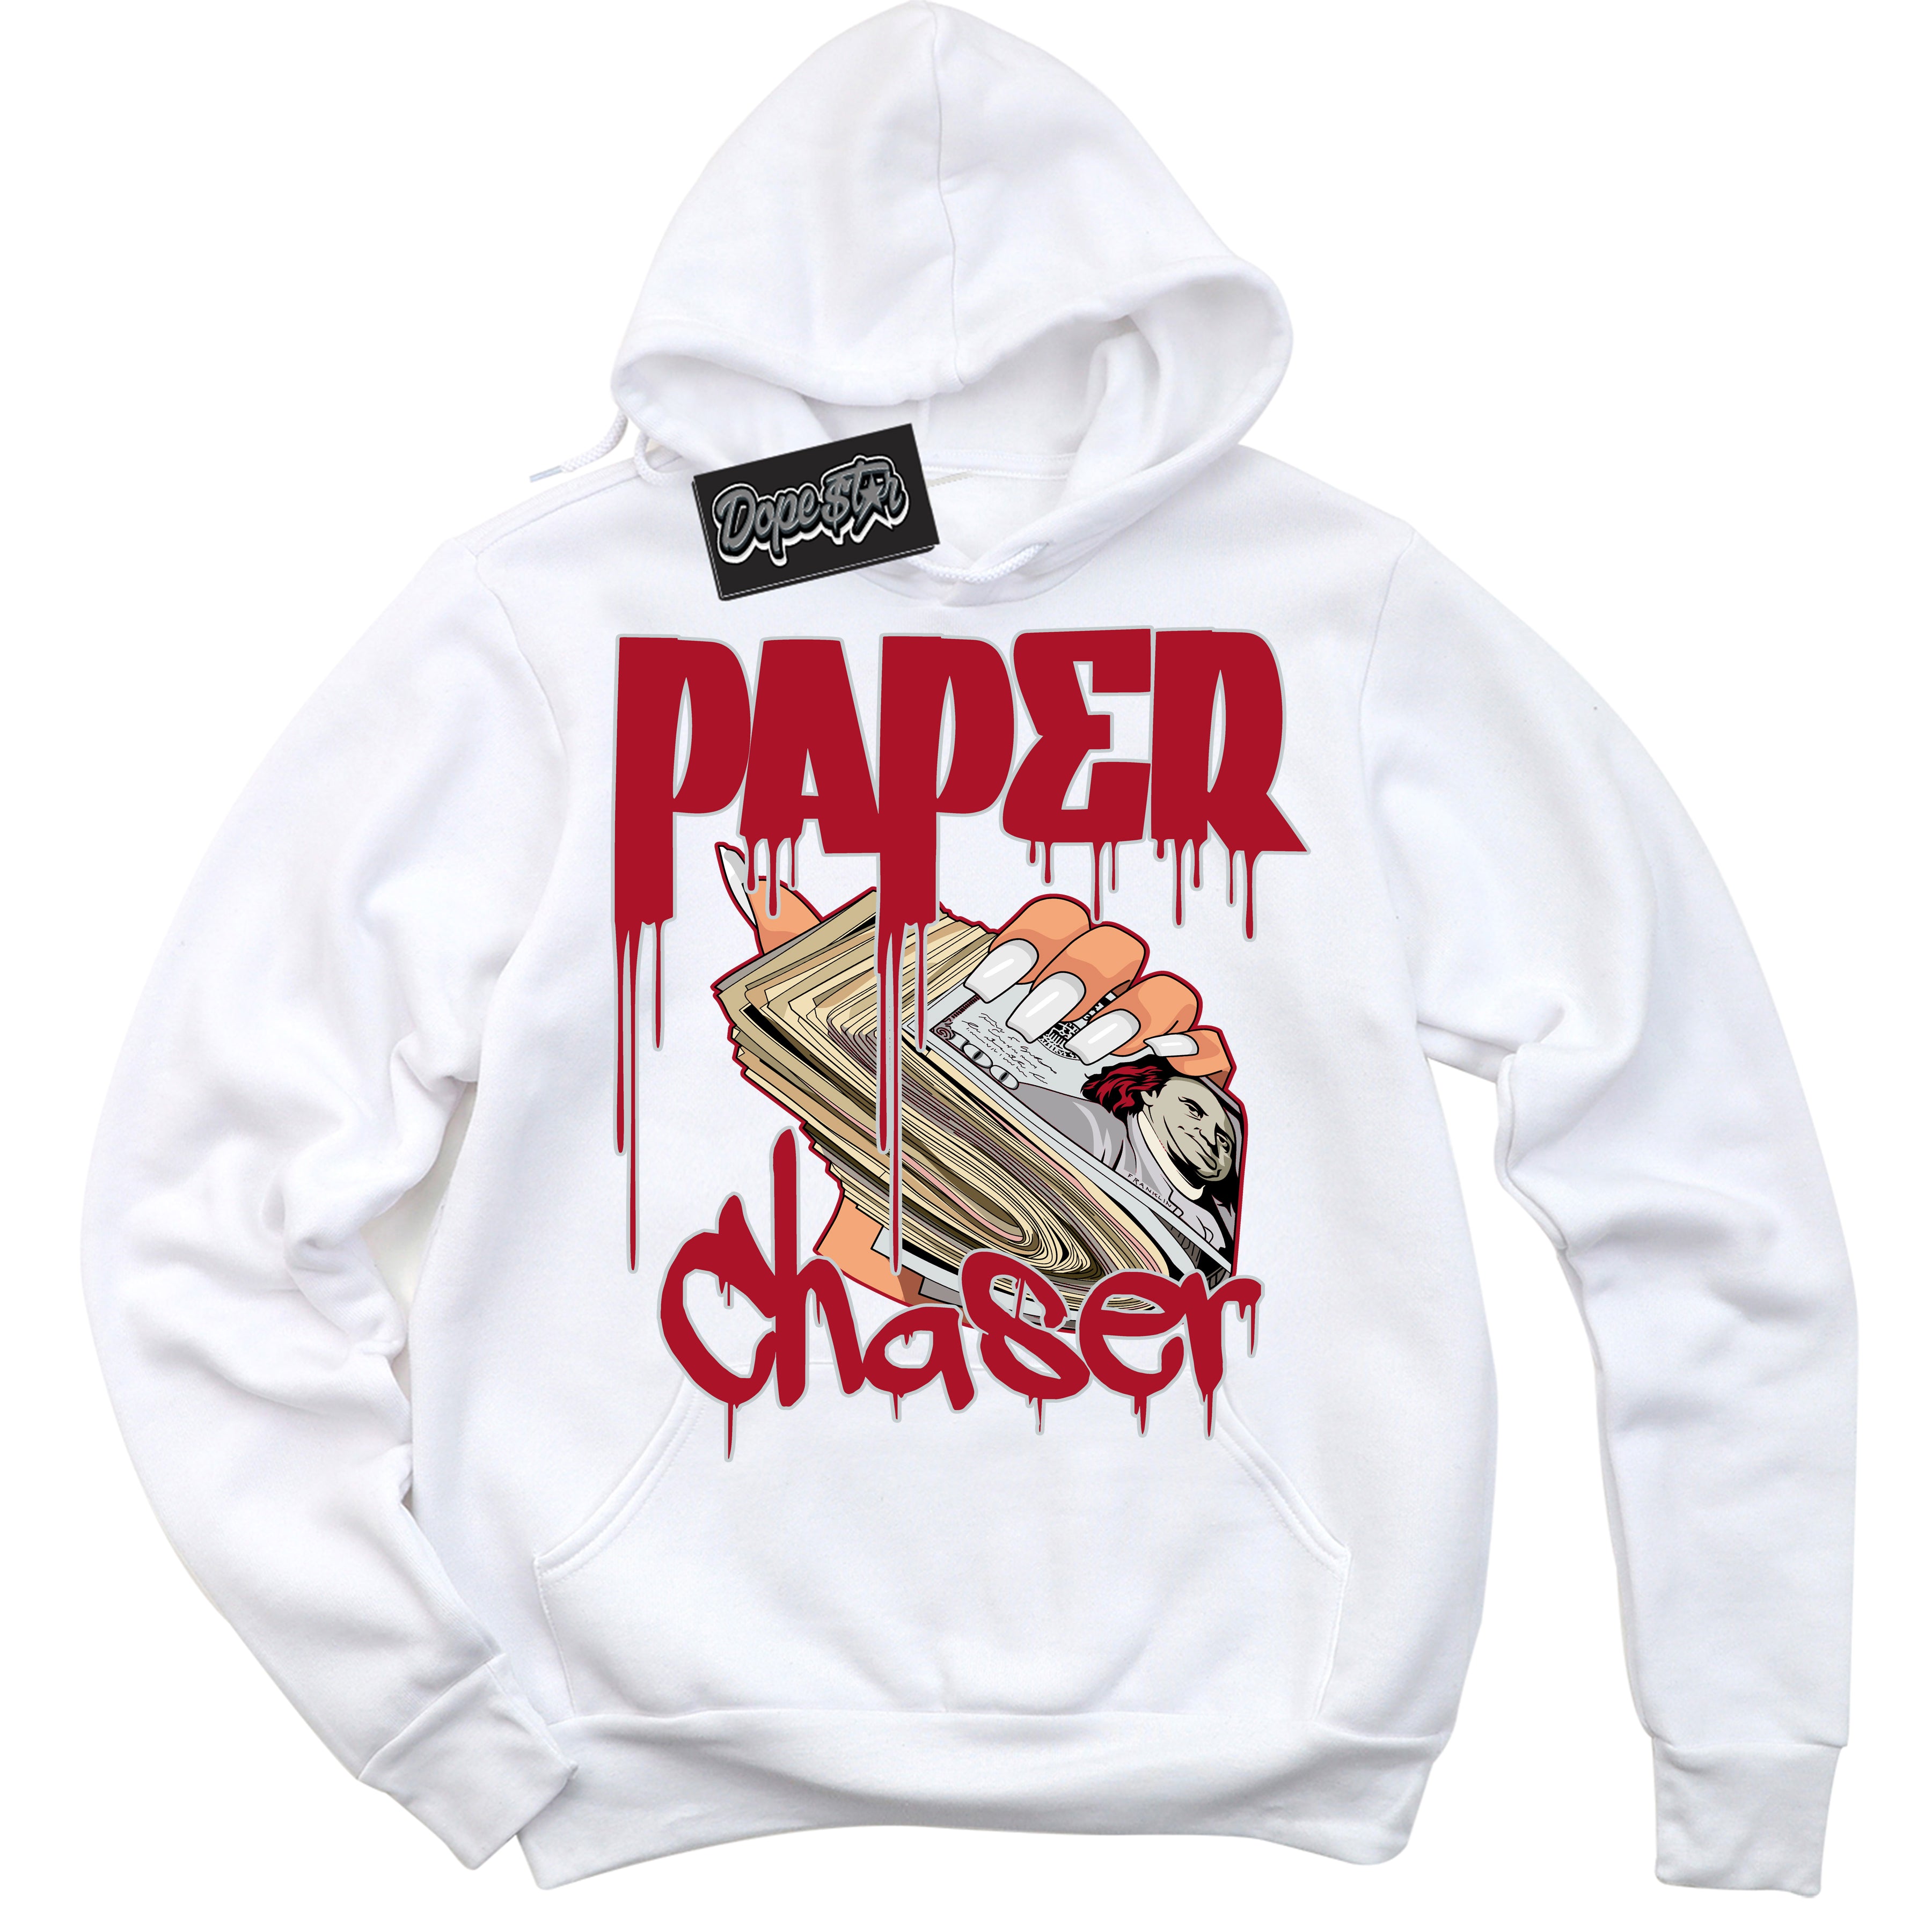 Cool Black Hoodie with “ Paper Chaser ”  design that Perfectly Matches  Reverse Ultraman Sneakers.